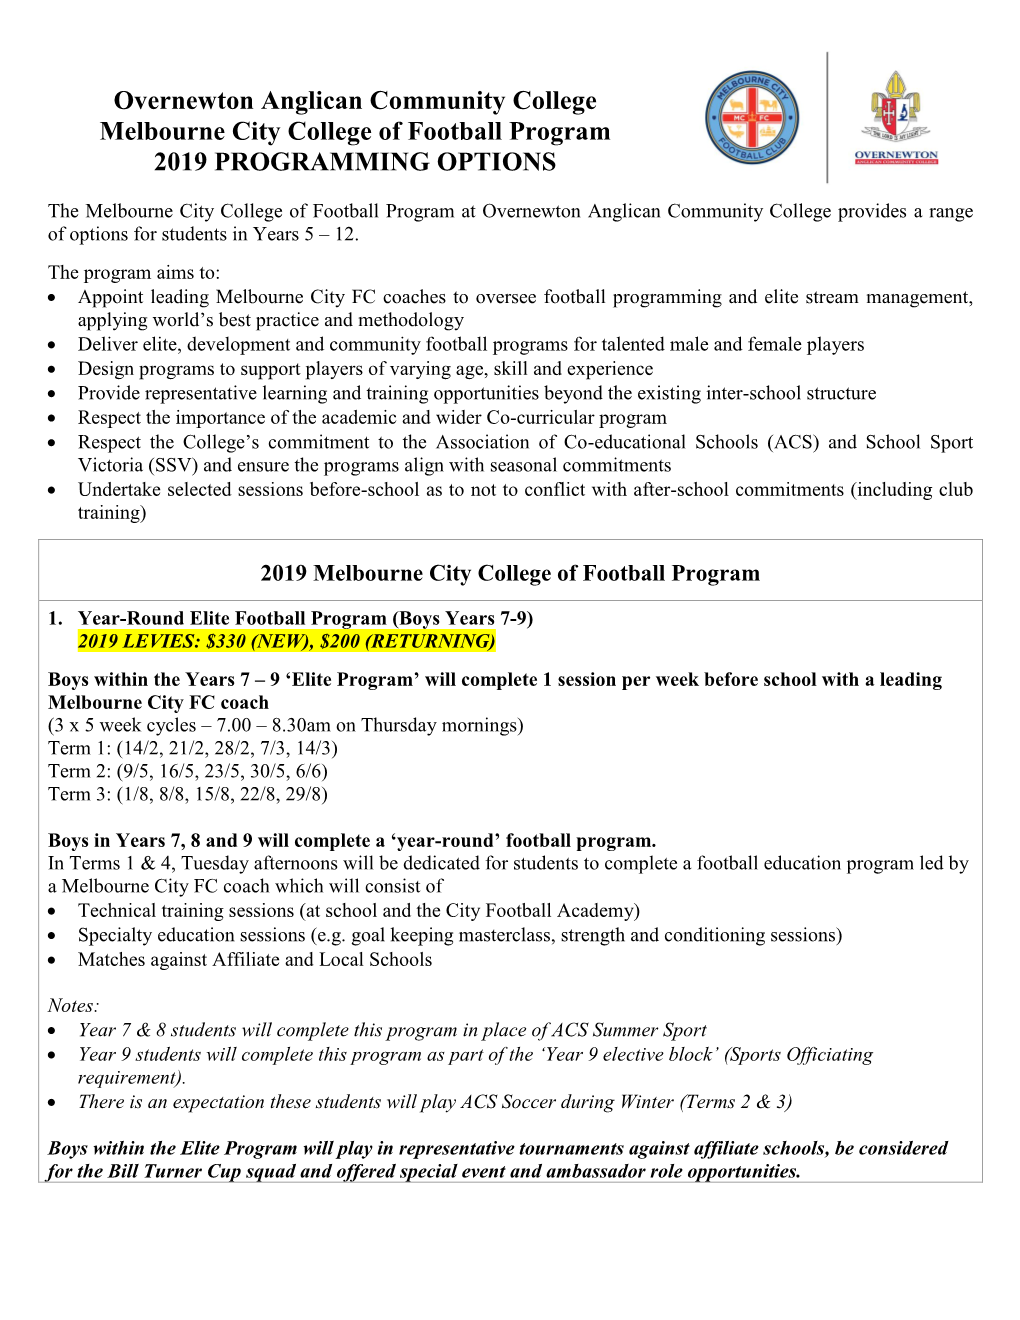 Overnewton Anglican Community College Melbourne City College of Football Program 2019 PROGRAMMING OPTIONS